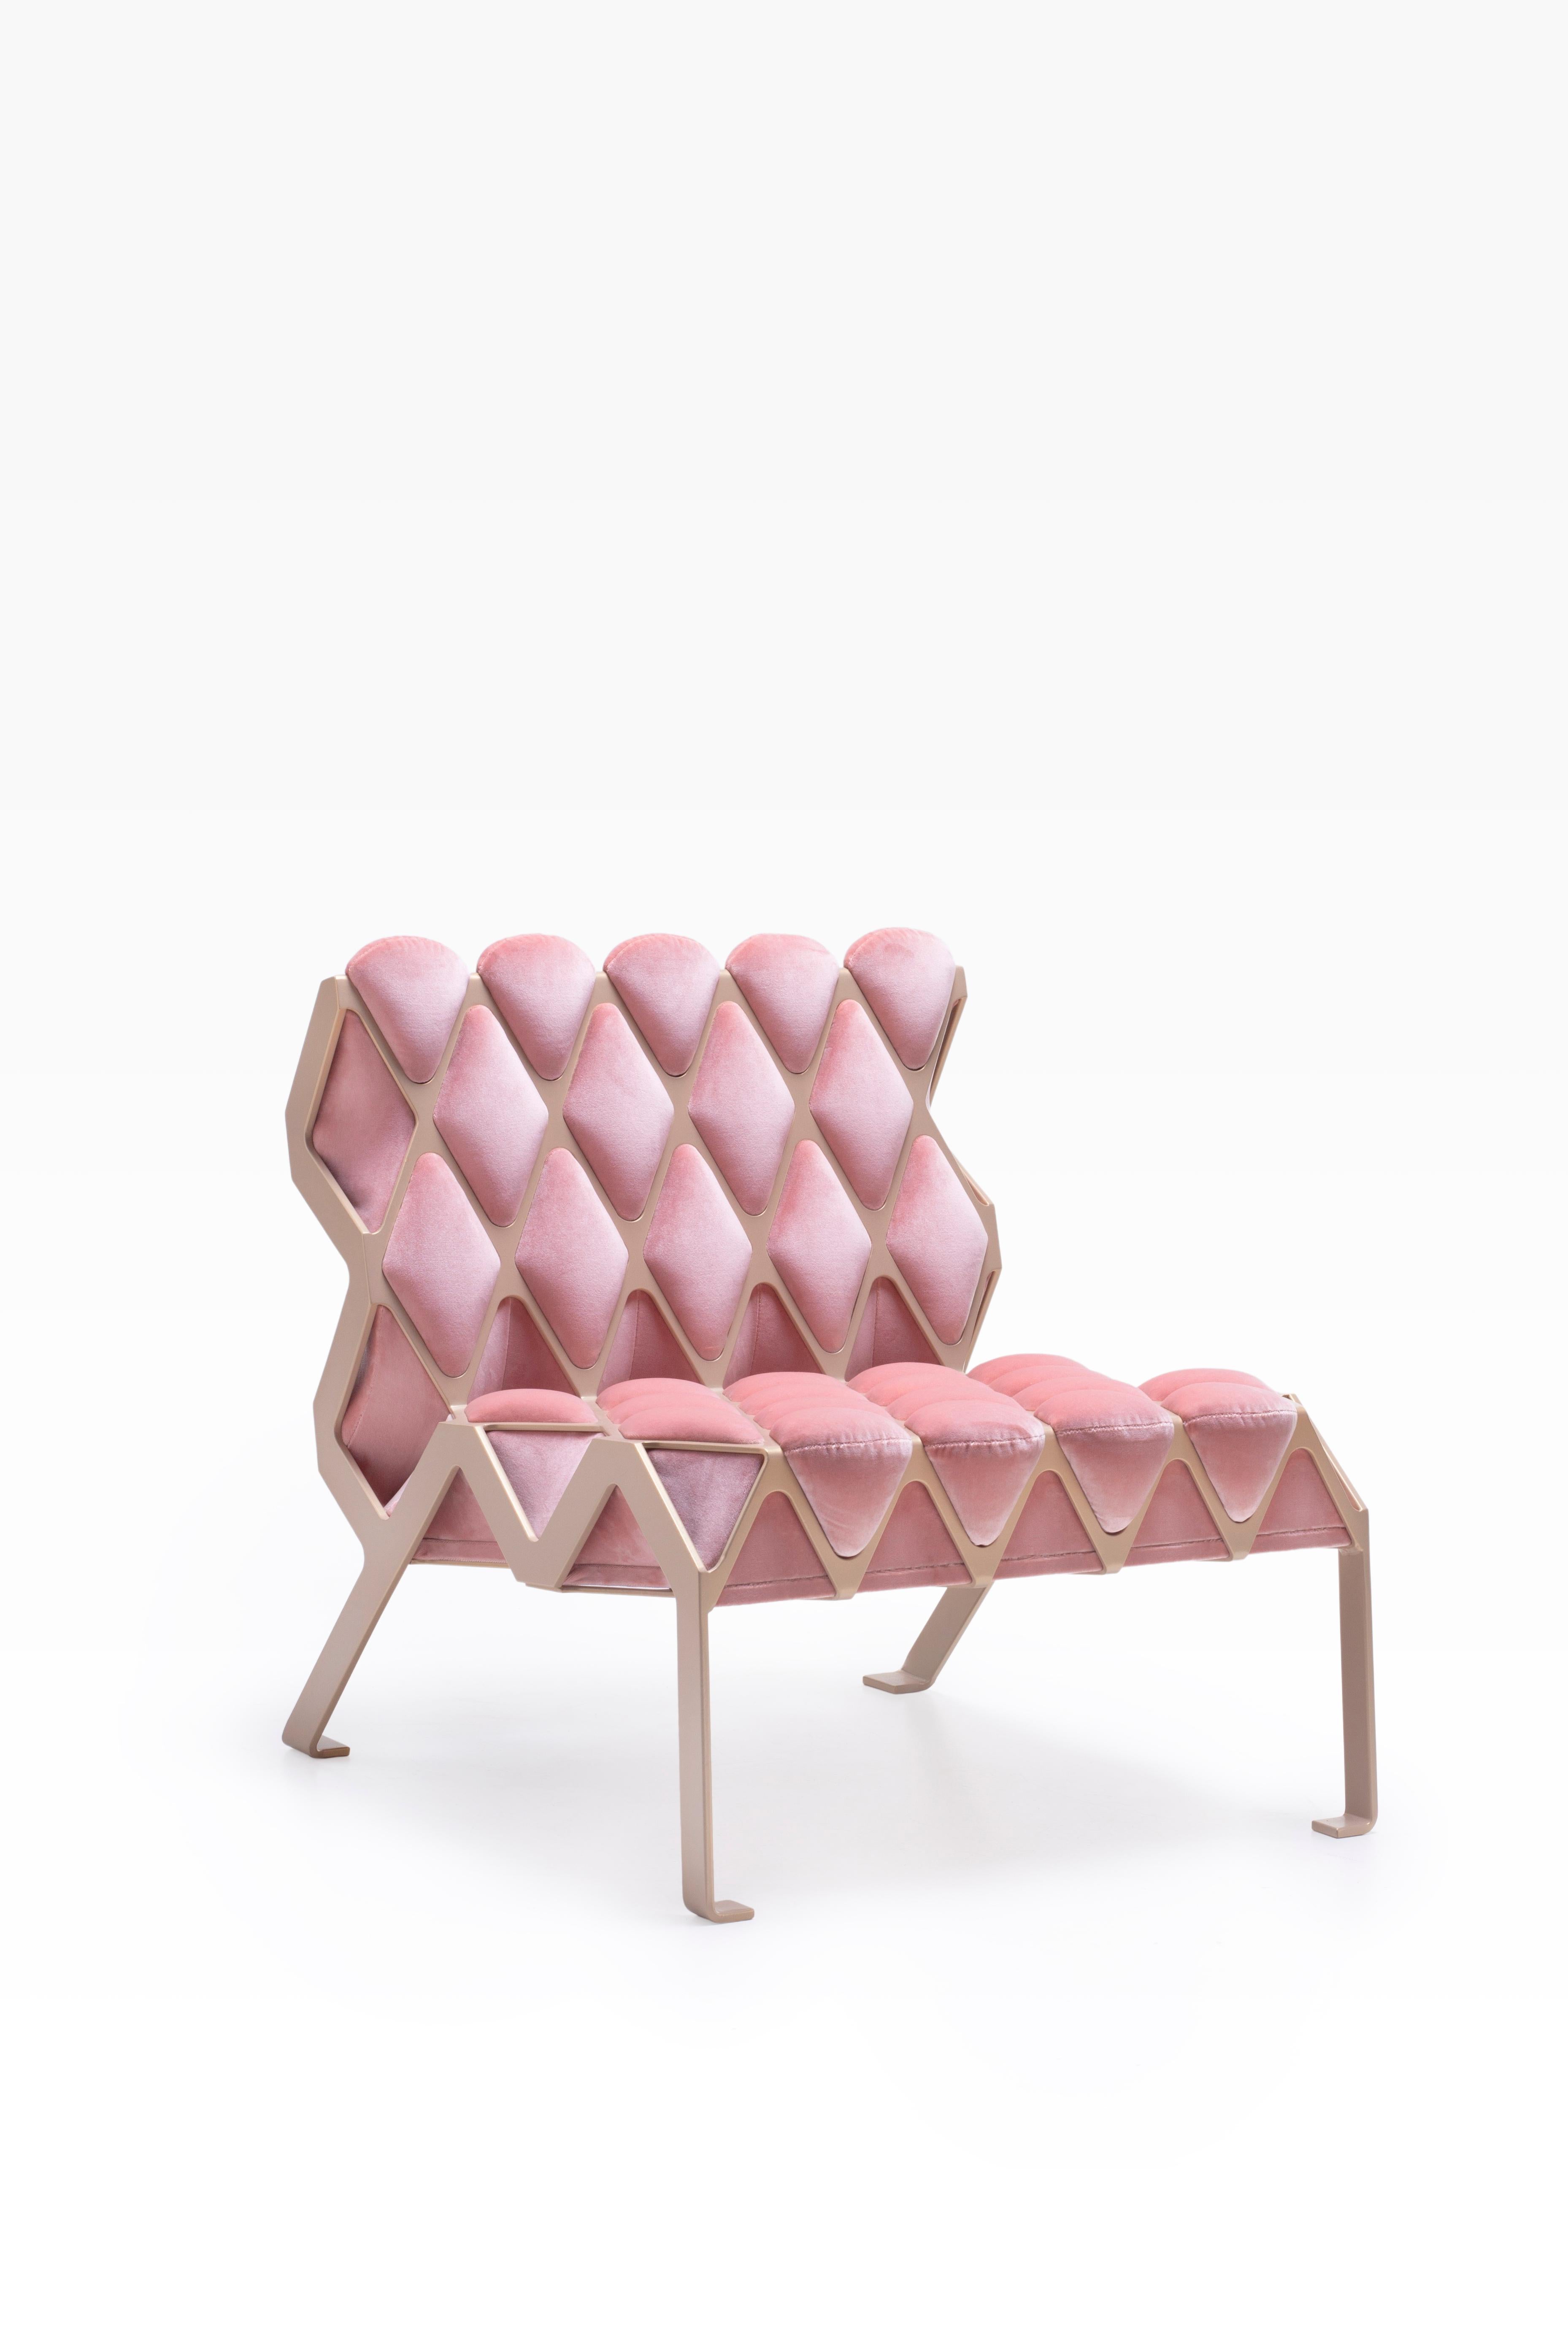 Marie-Antoinette matrice chair by Plumbum 
Dimensions: 25.60